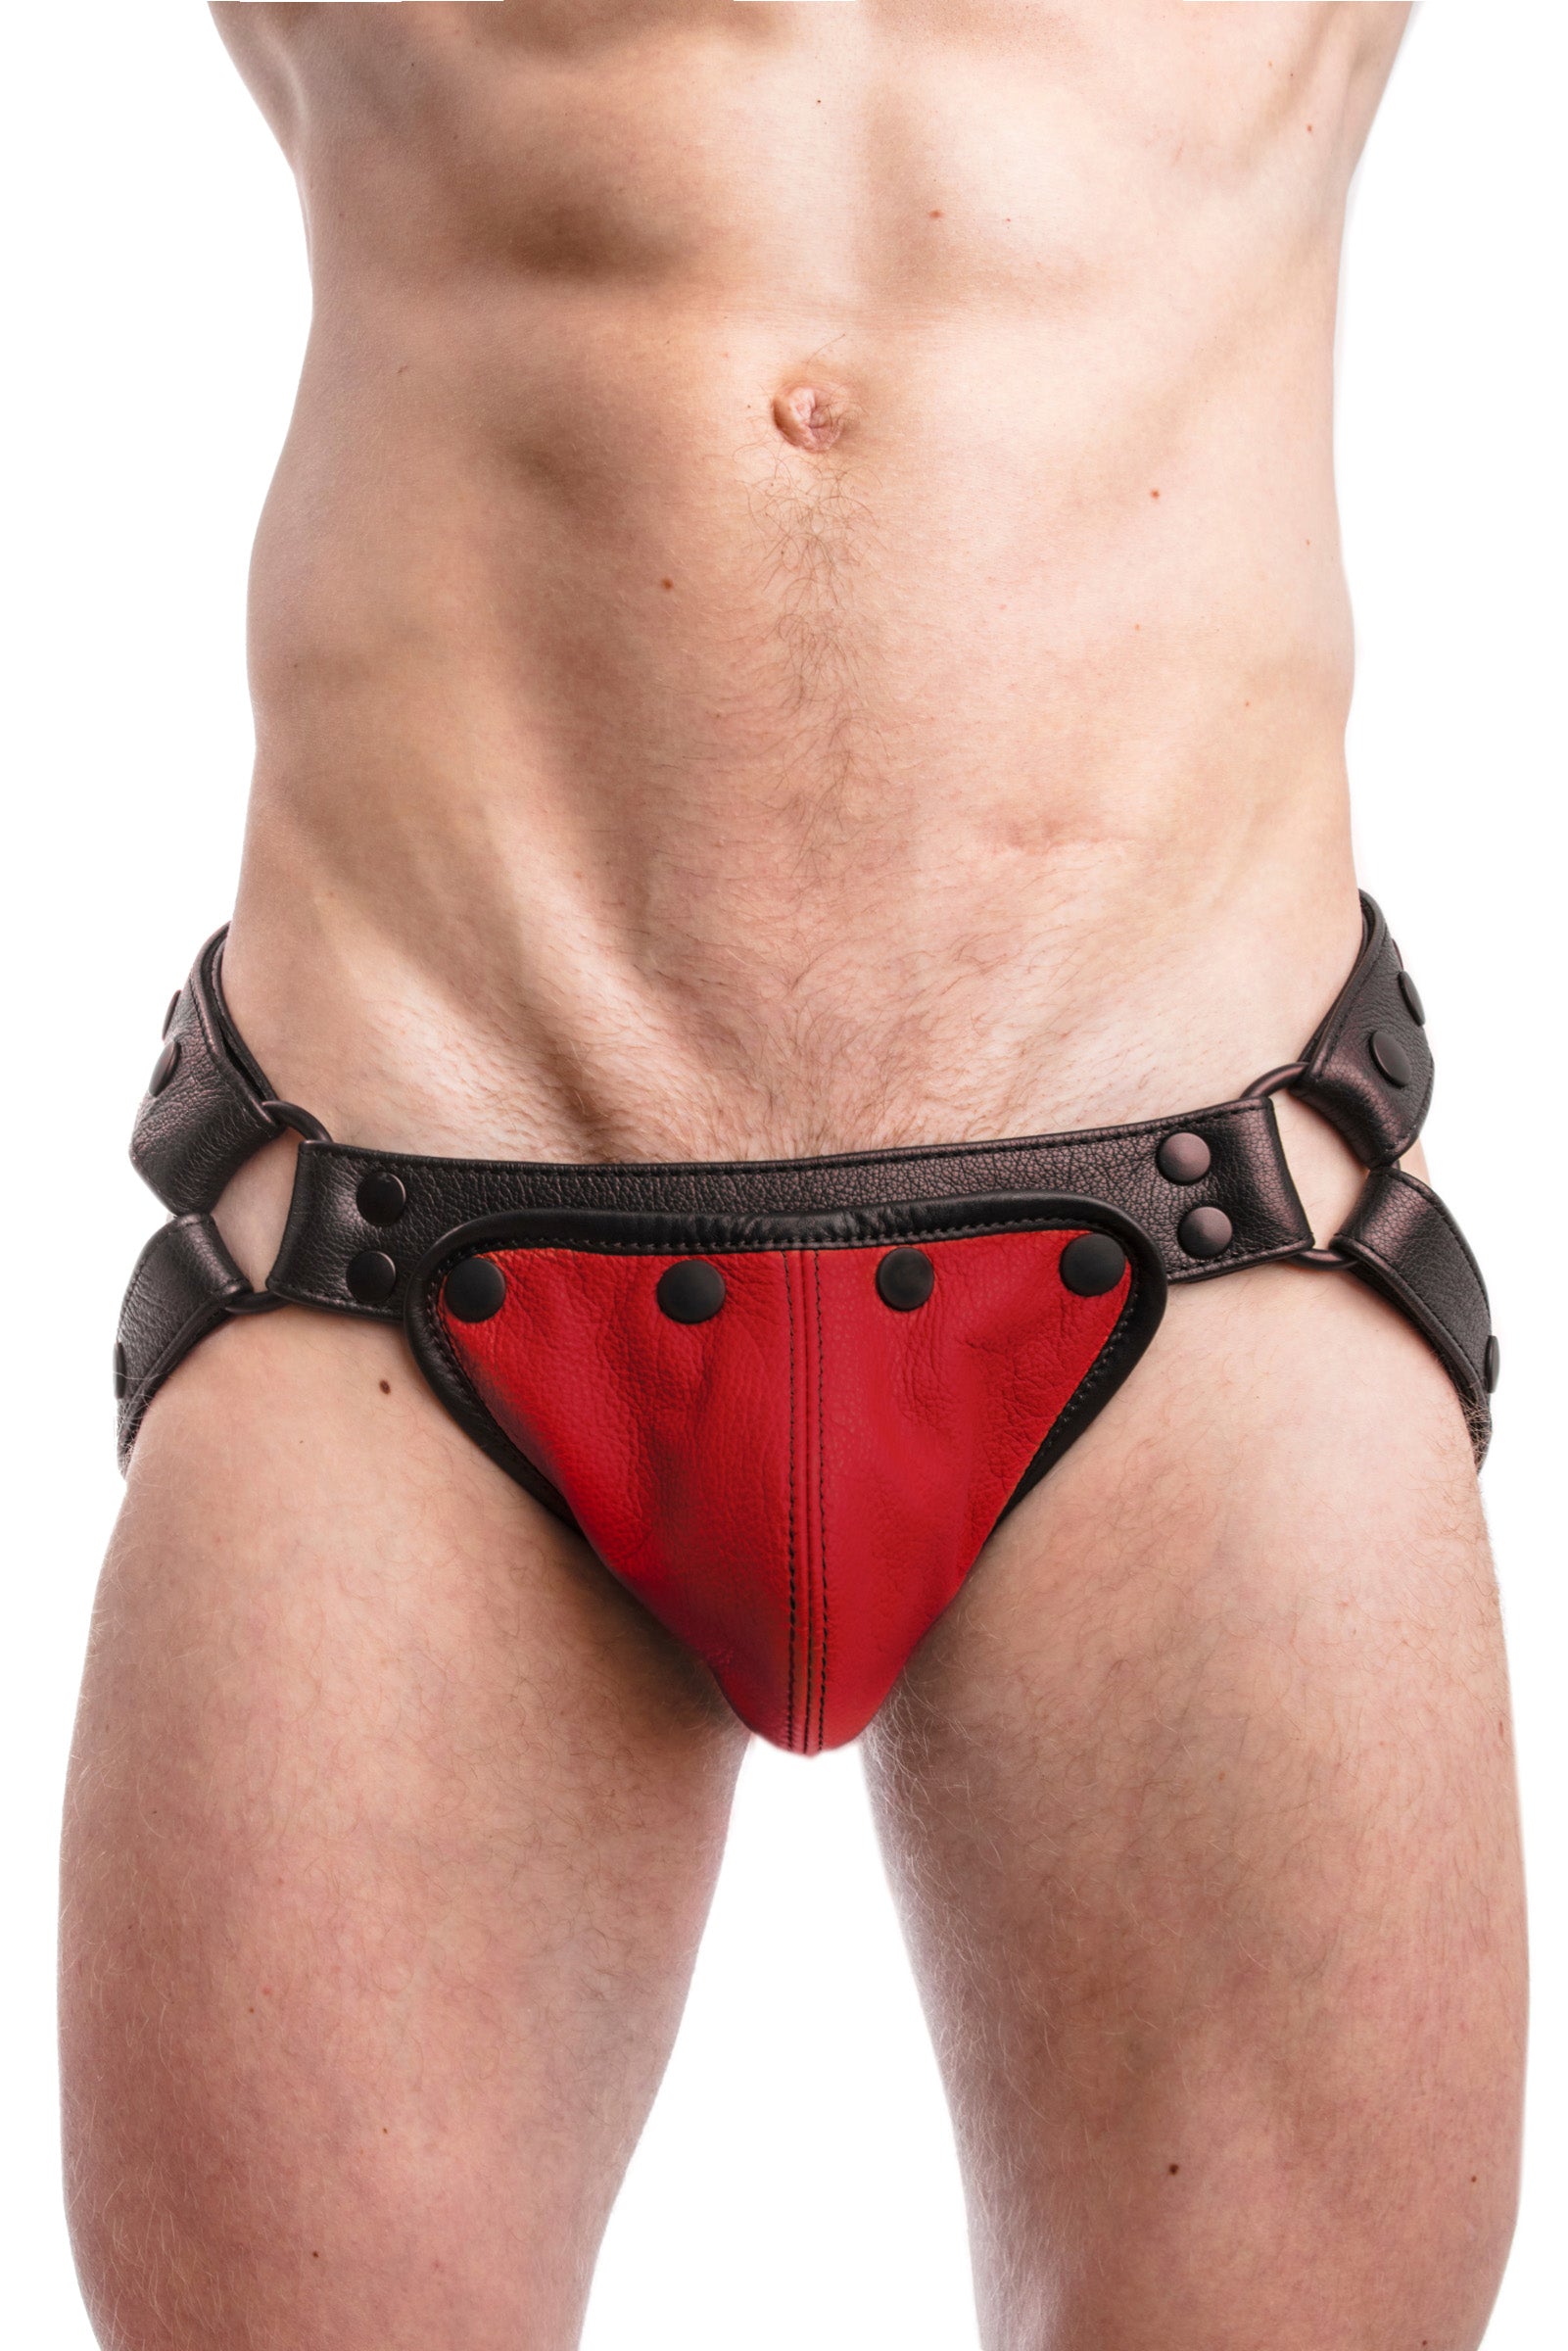 Colour Leather JOCKSTRAP, Join The ARMY